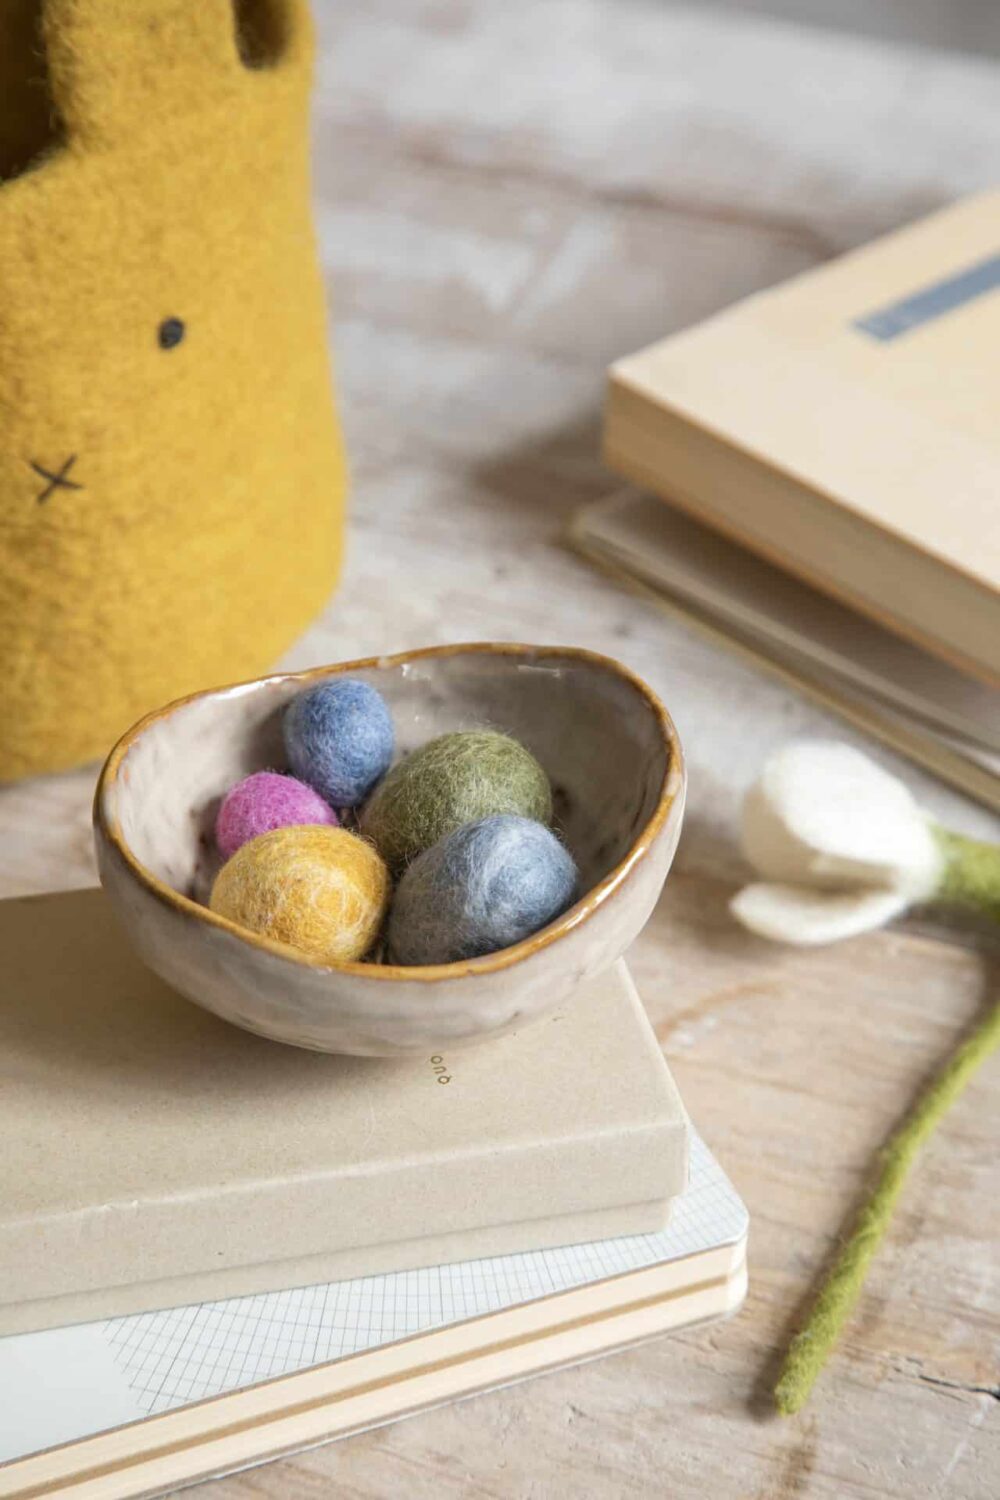 easter eggs, easter eggs in wool, marbled filtæg, easter decorations, decorations to hang, en gry &amp; sif decorations, én gry &amp; sofie, remix by sofie, fairtrade